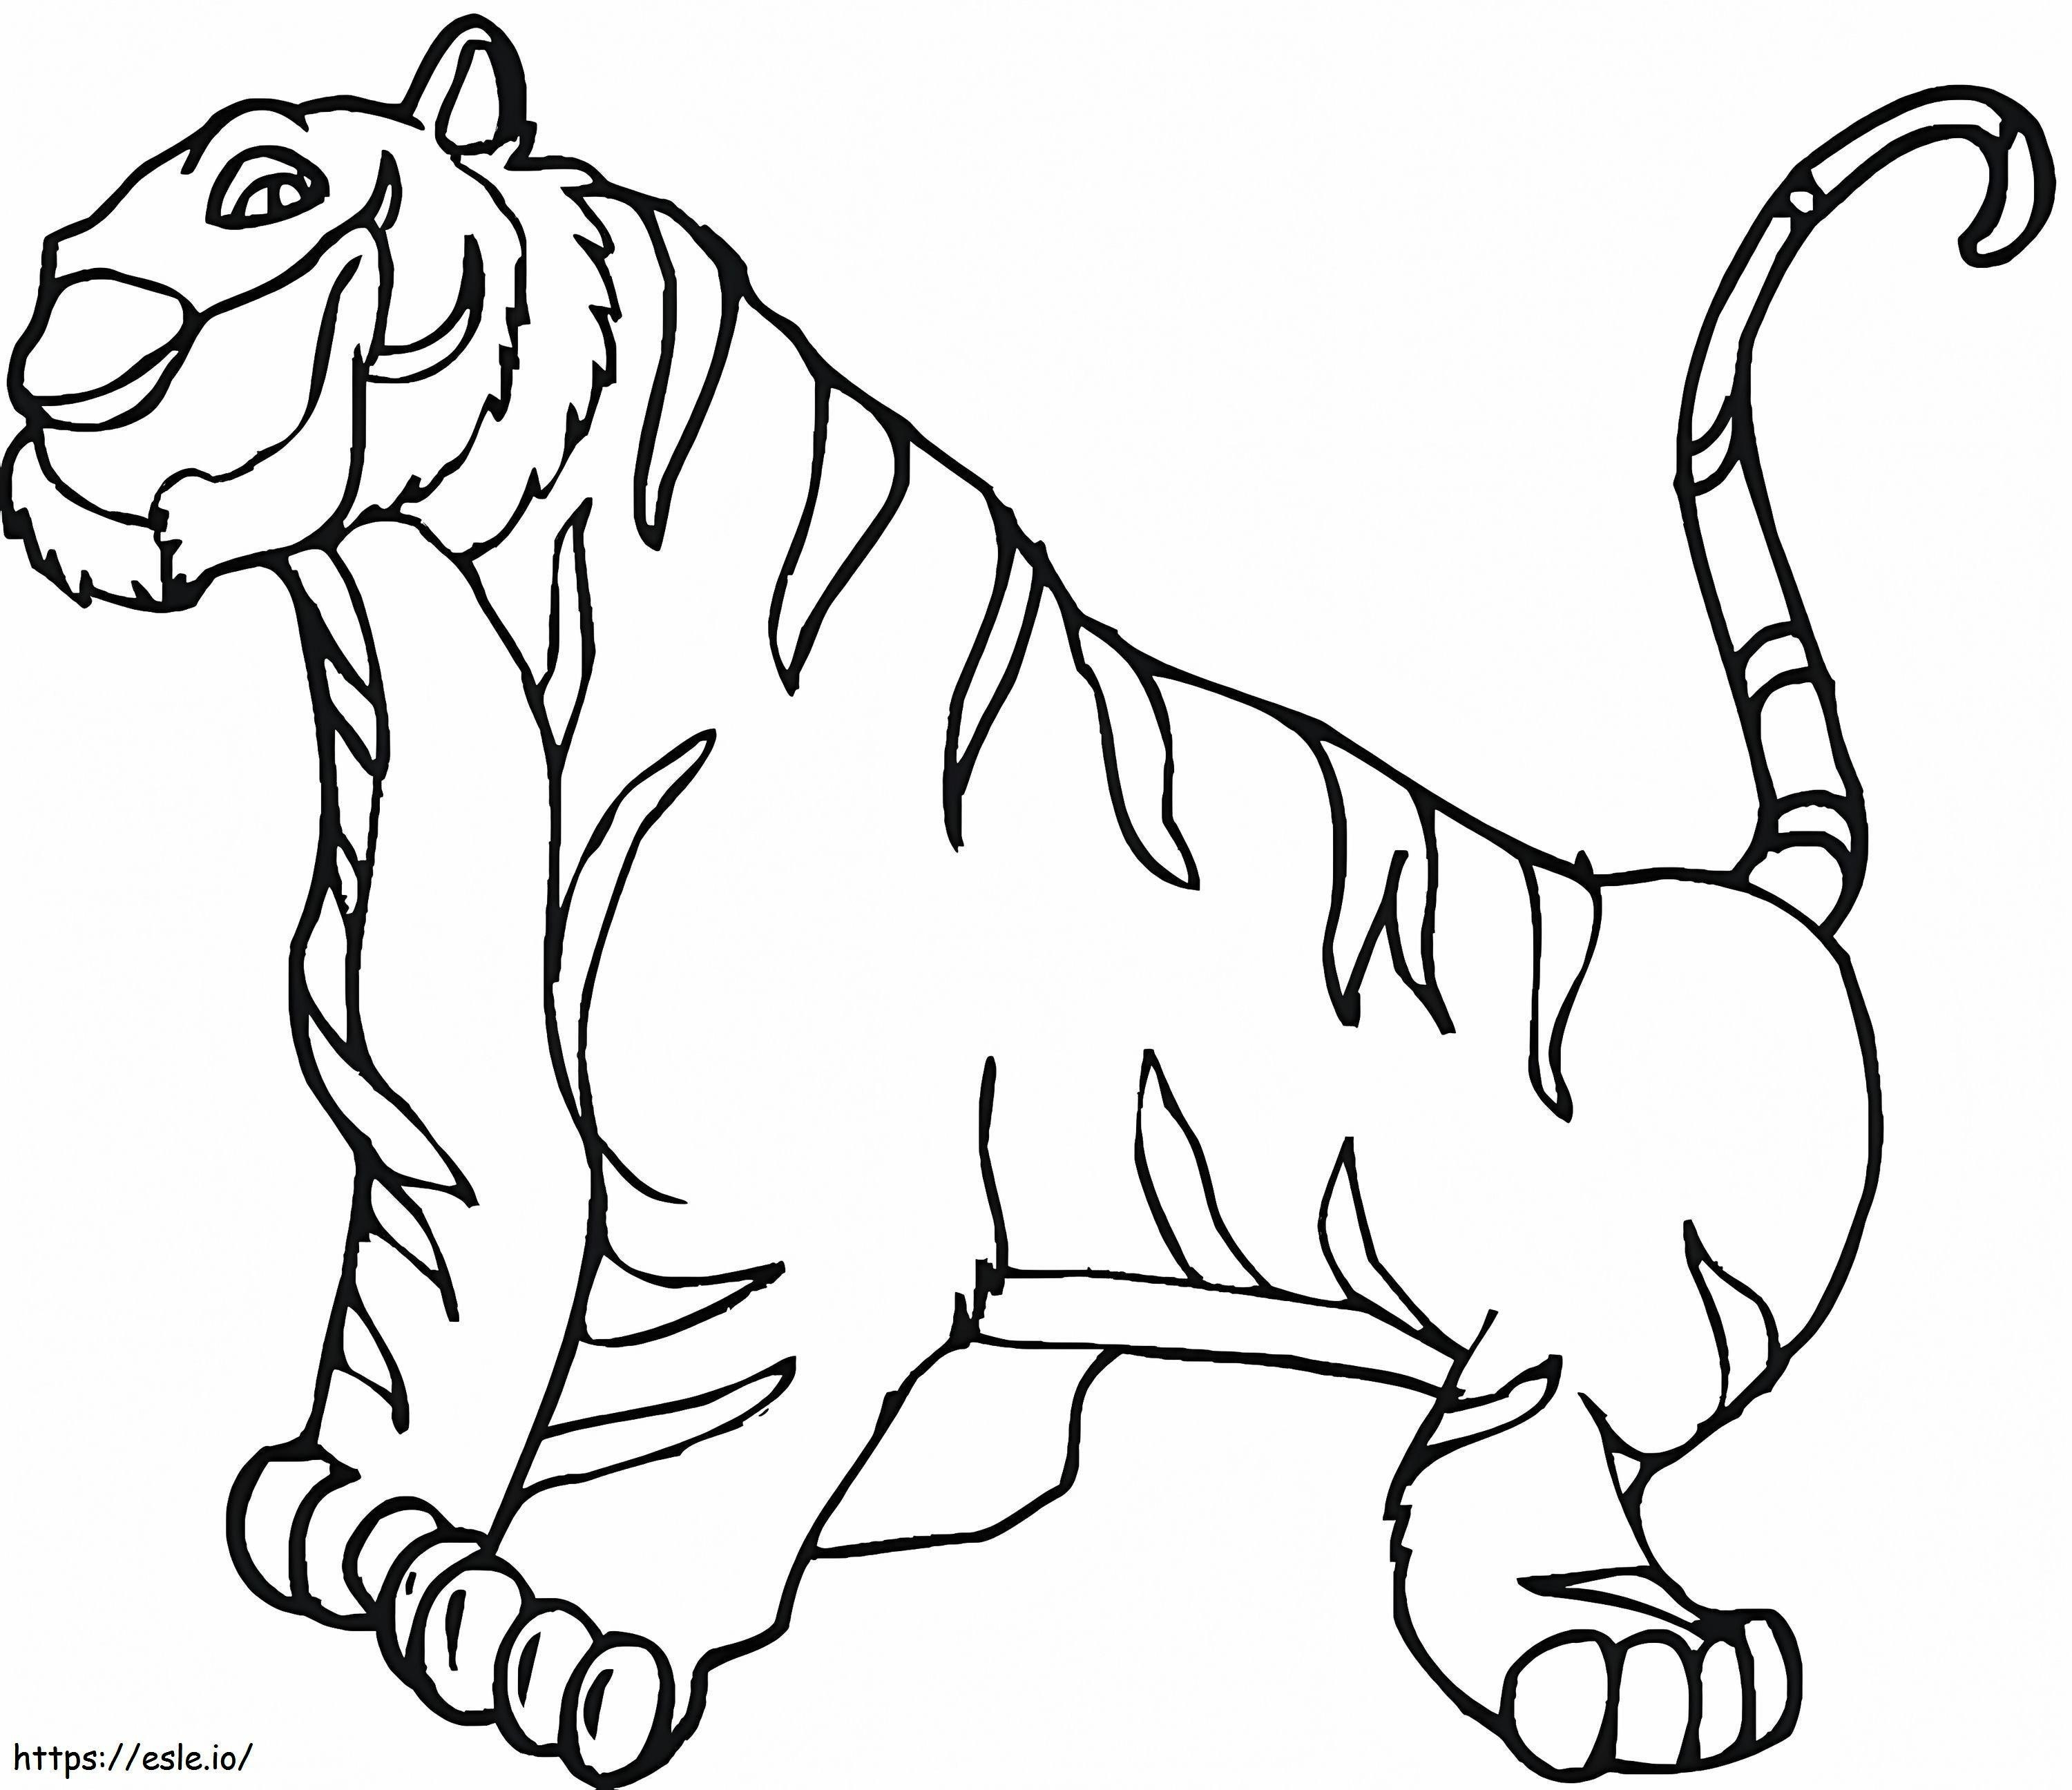 One Tiger coloring page